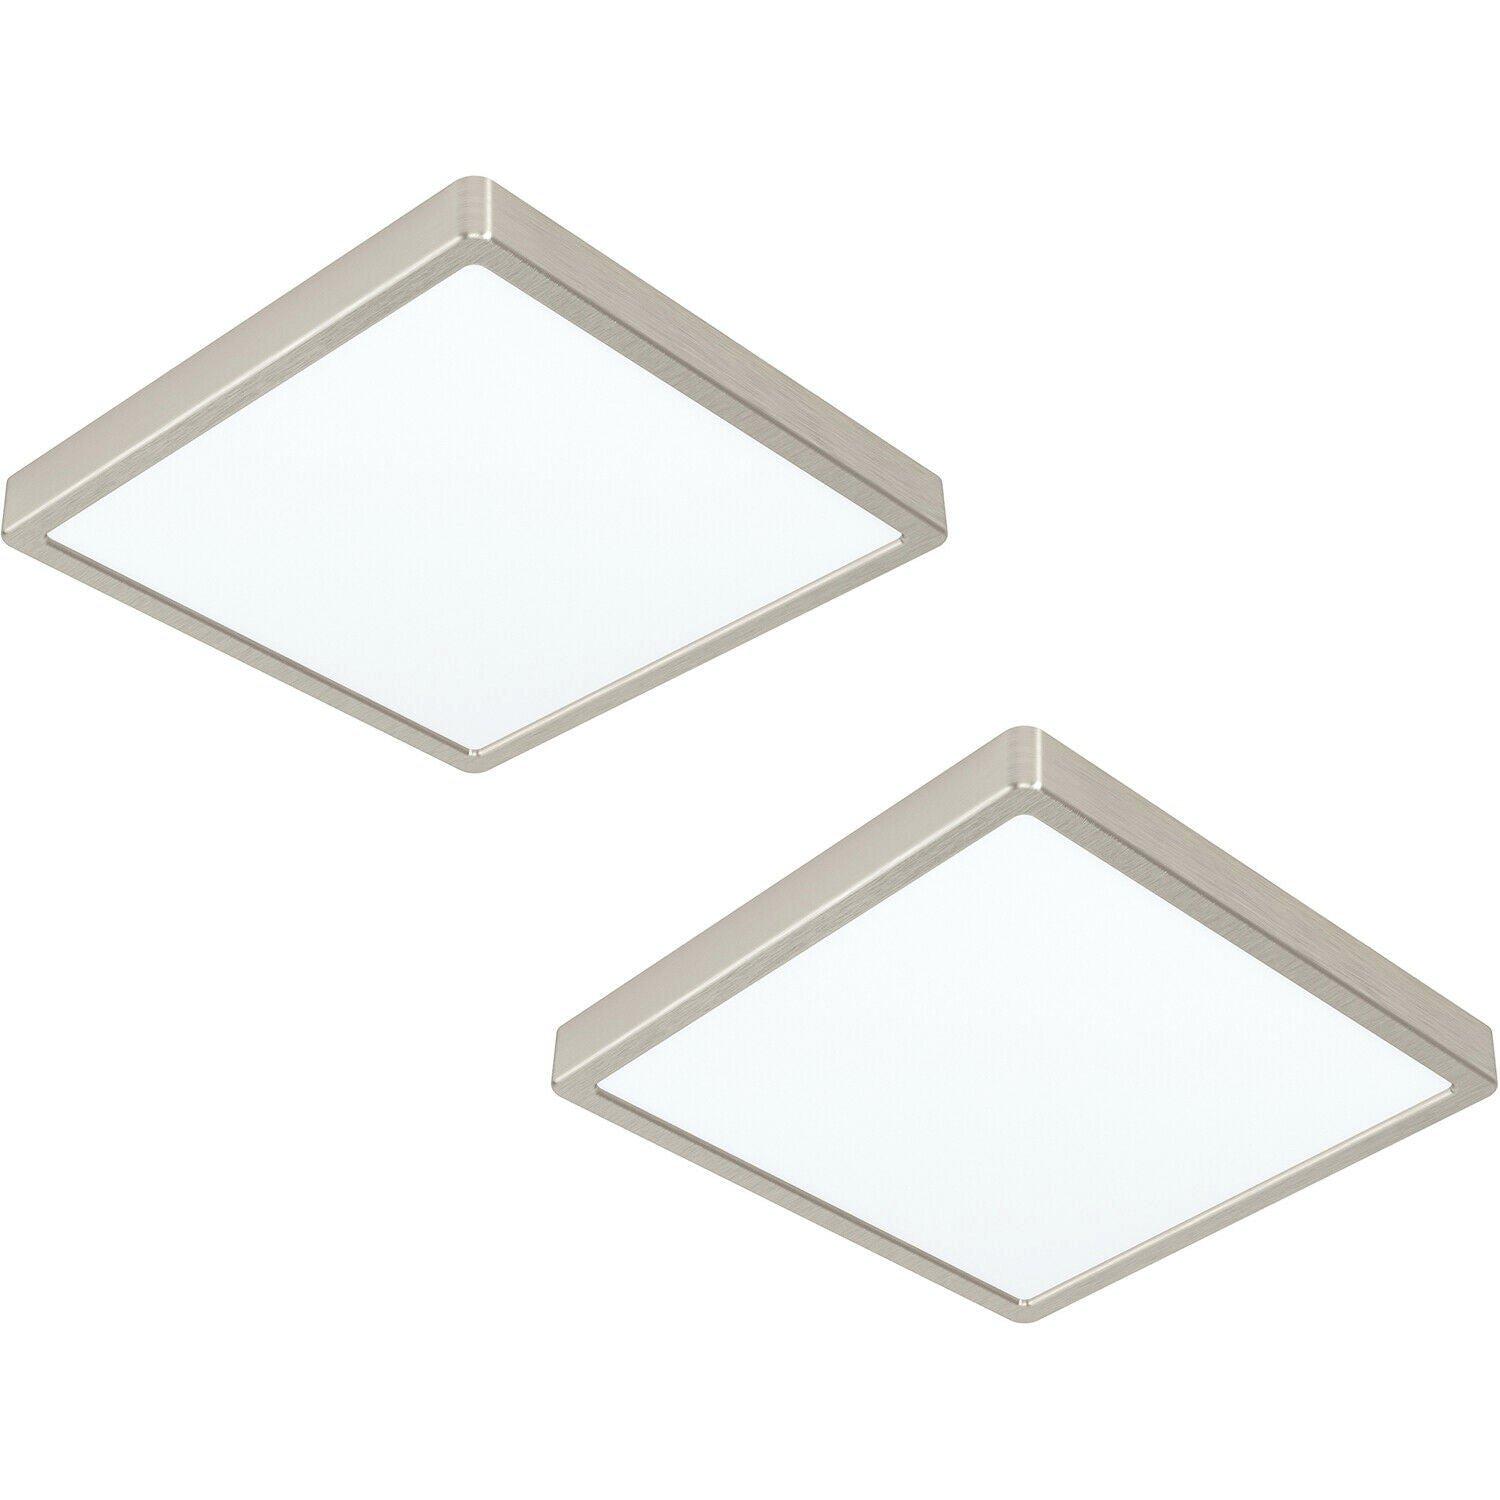 2 PACK Ceiling Light Satin Nickel 285mm Square Surface Mounted 20W LED 3000K